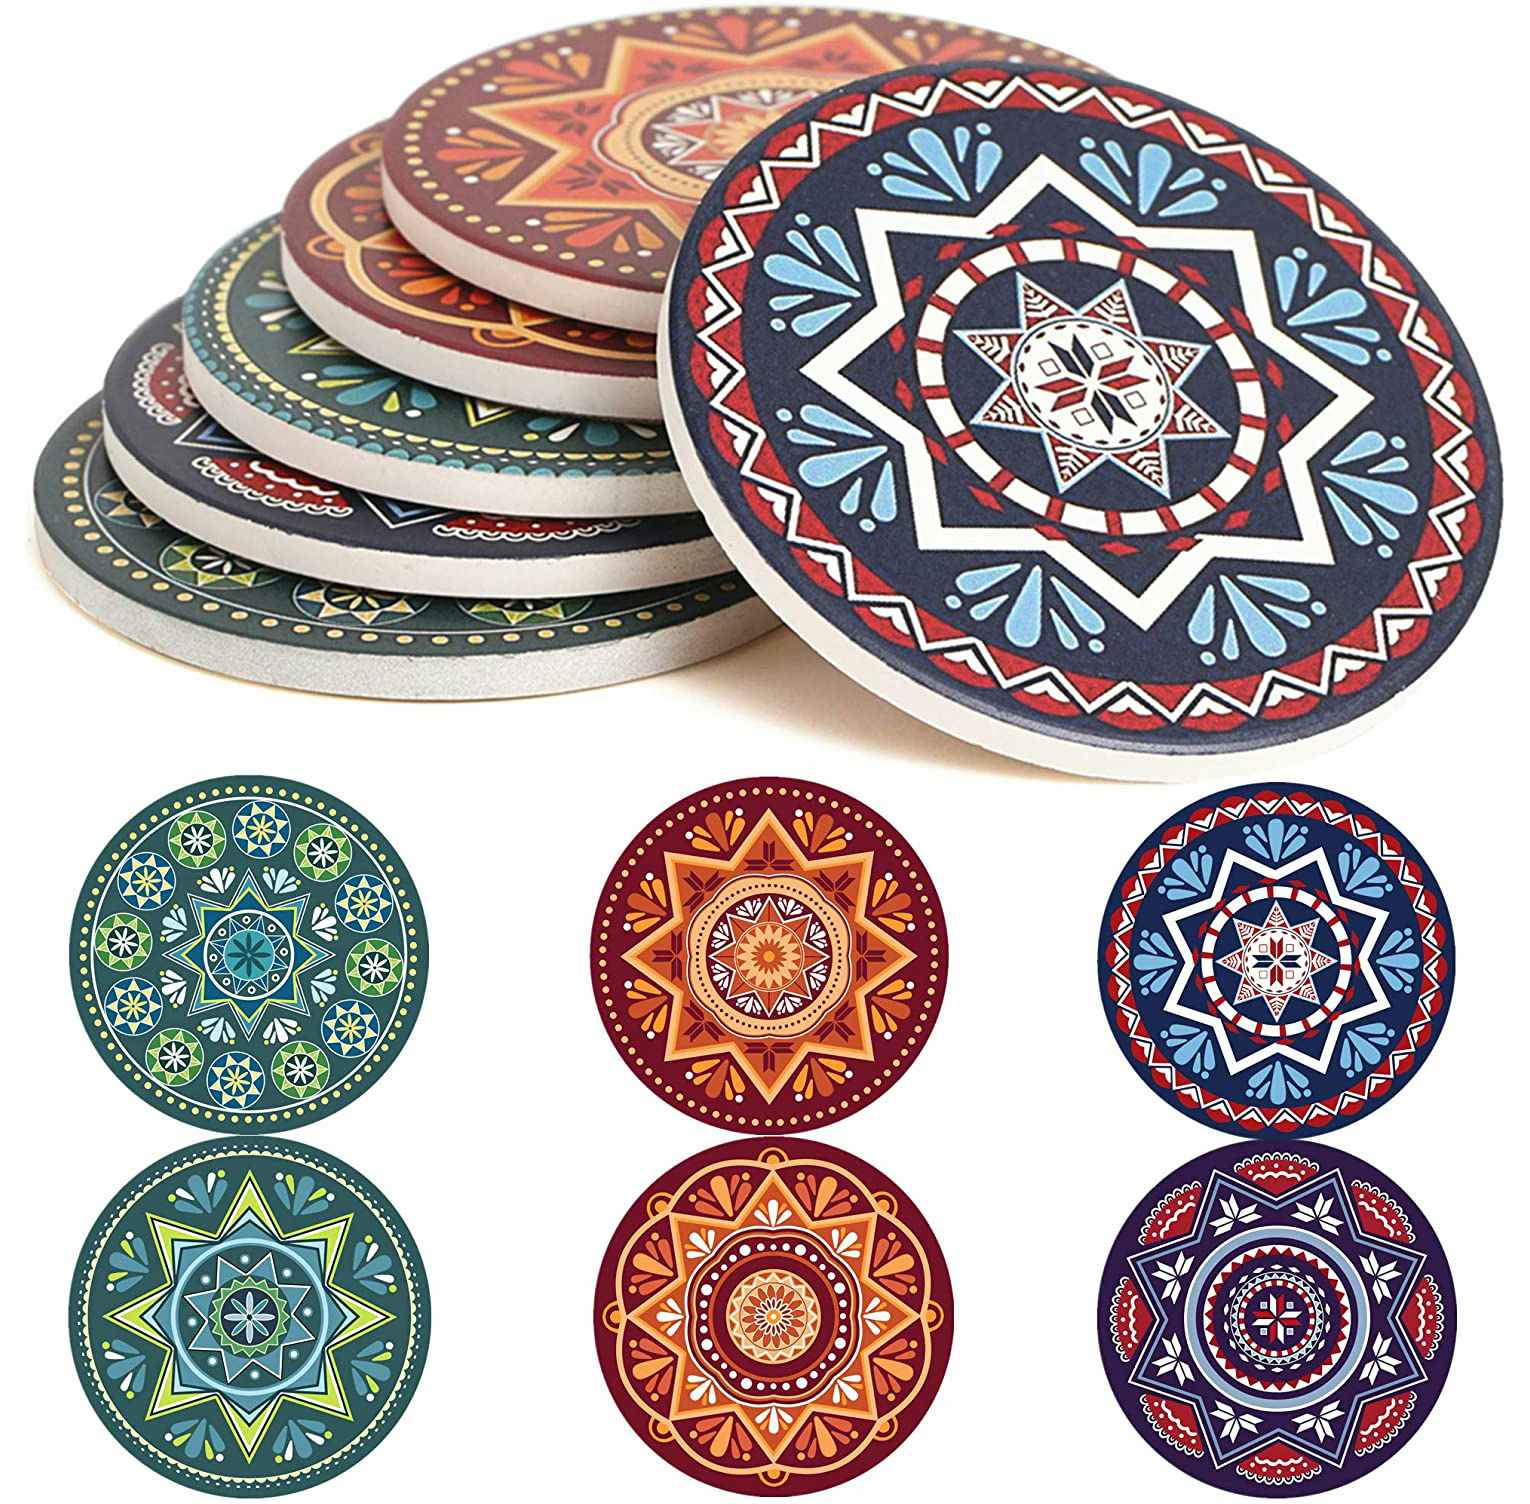 secret santa gifts - a stack of coasters with cool designs on them.